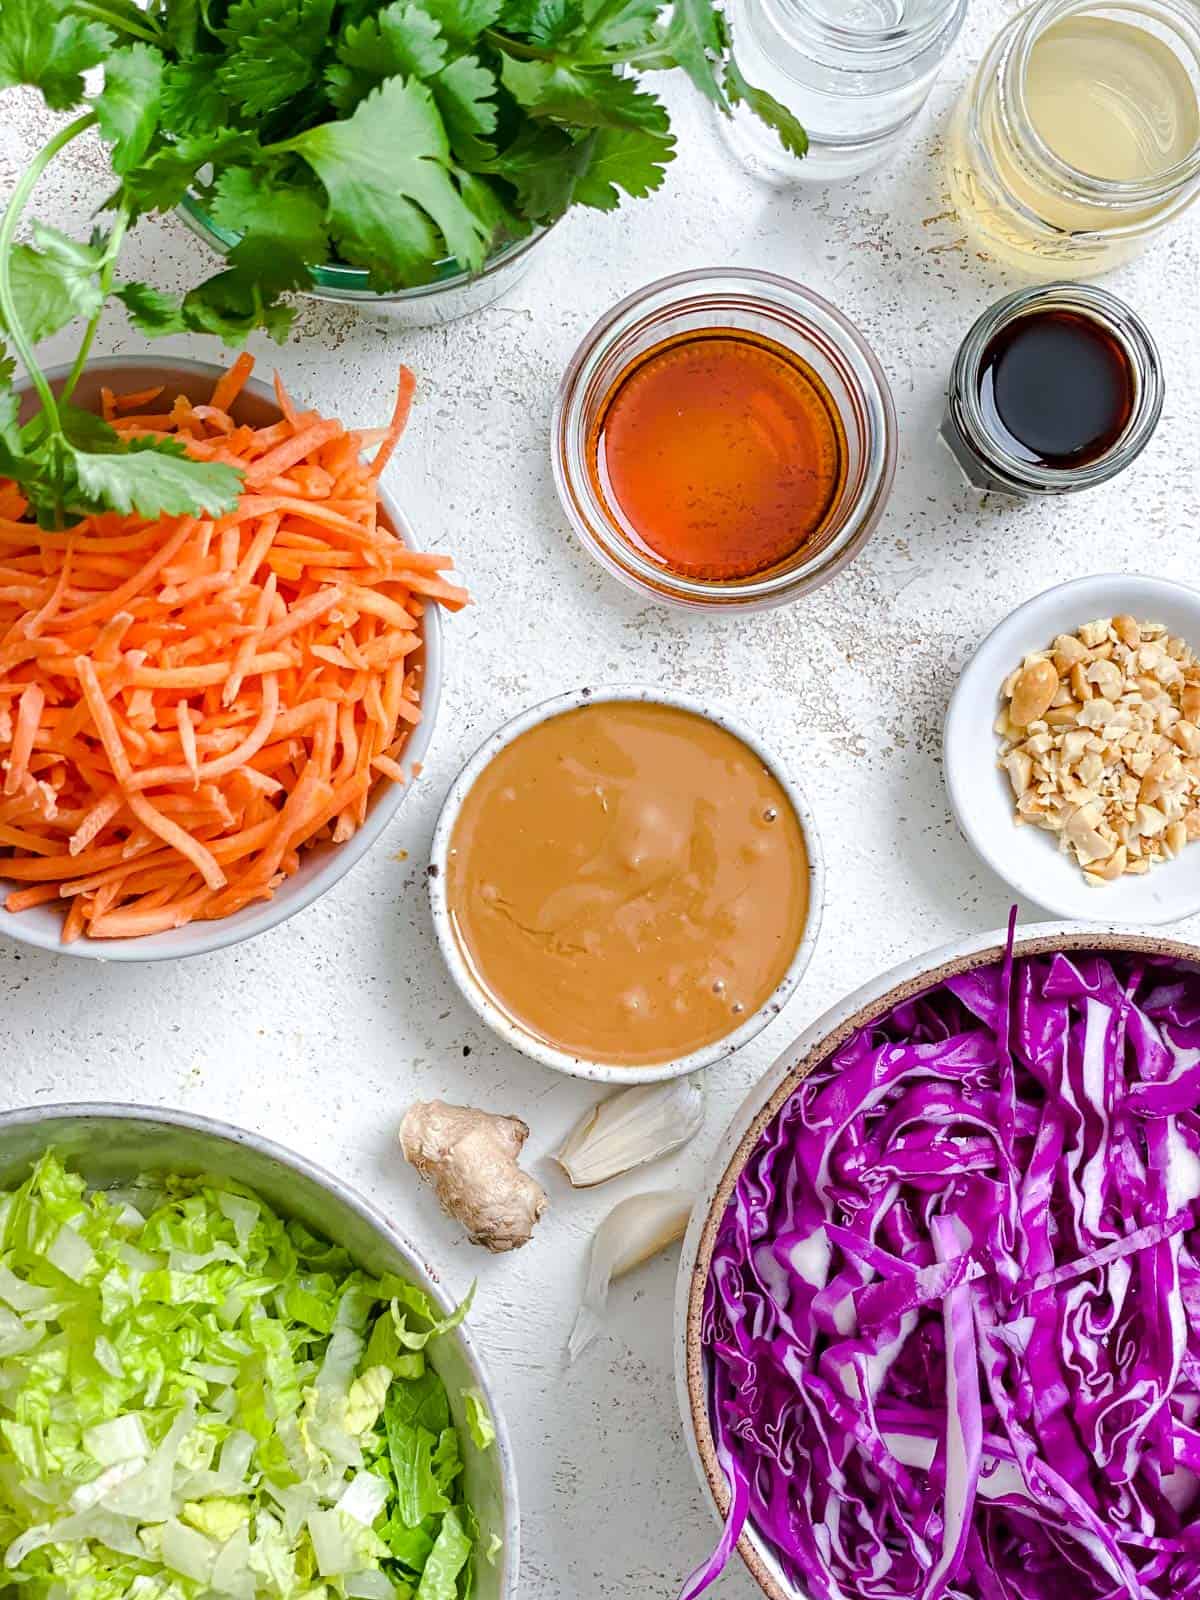 ingredients for Crunchy Thai Peanut Salad against a white background